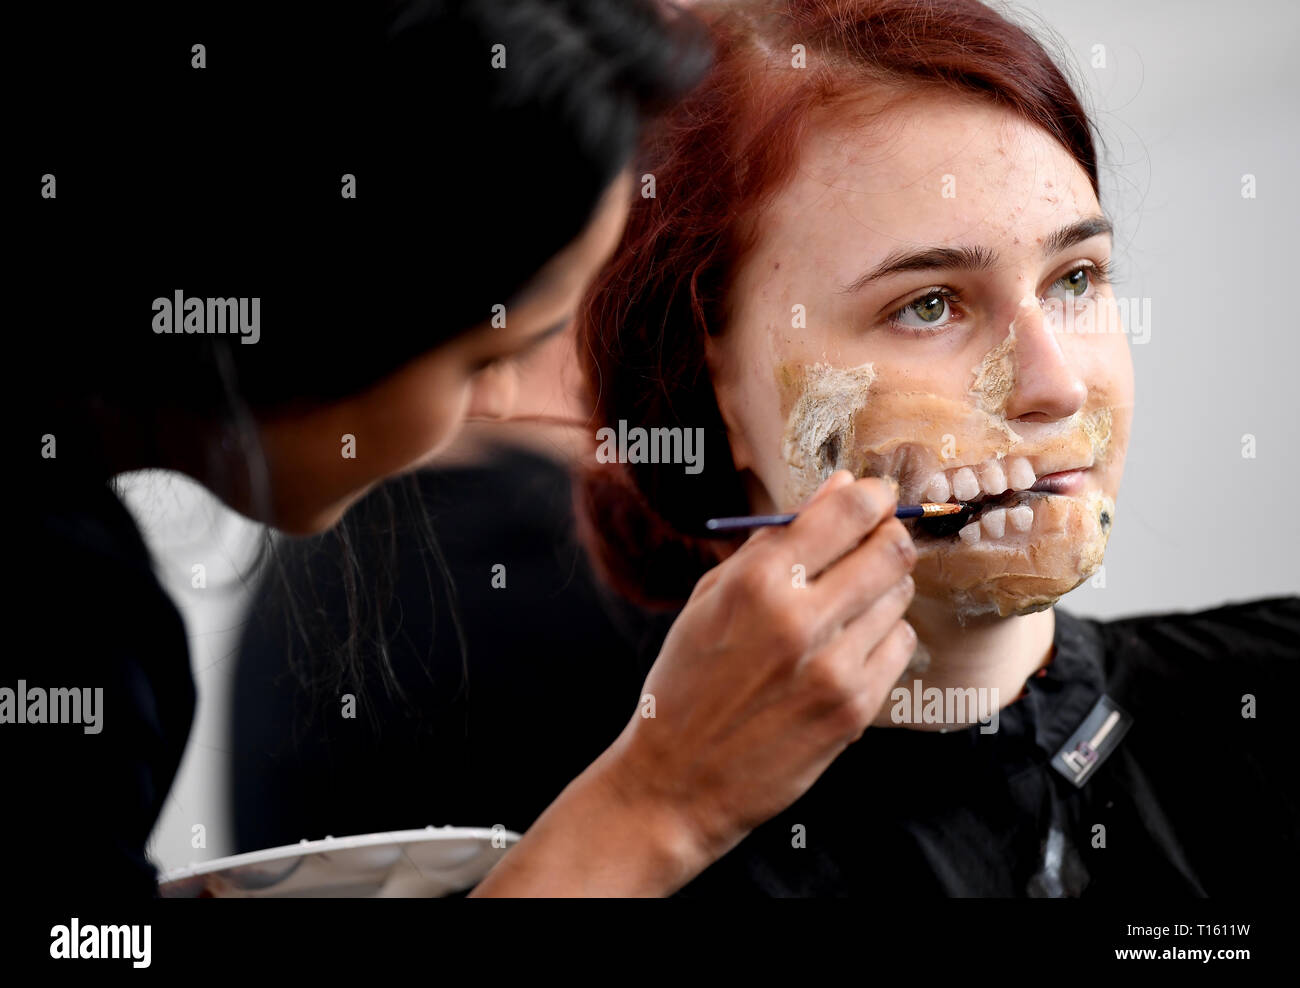 Berlin, Germany. 23rd Mar, 2019. At the 'Walker Stalker Con' in the Messe Berlin, Bara has herself painted as a zombie. At the meeting for fans of the series 'Game of Thrones' and 'The Walking Dead' fans can meet their idols. Credit: Britta Pedersen/dpa-Zentralbild/dpa/Alamy Live News Stock Photo